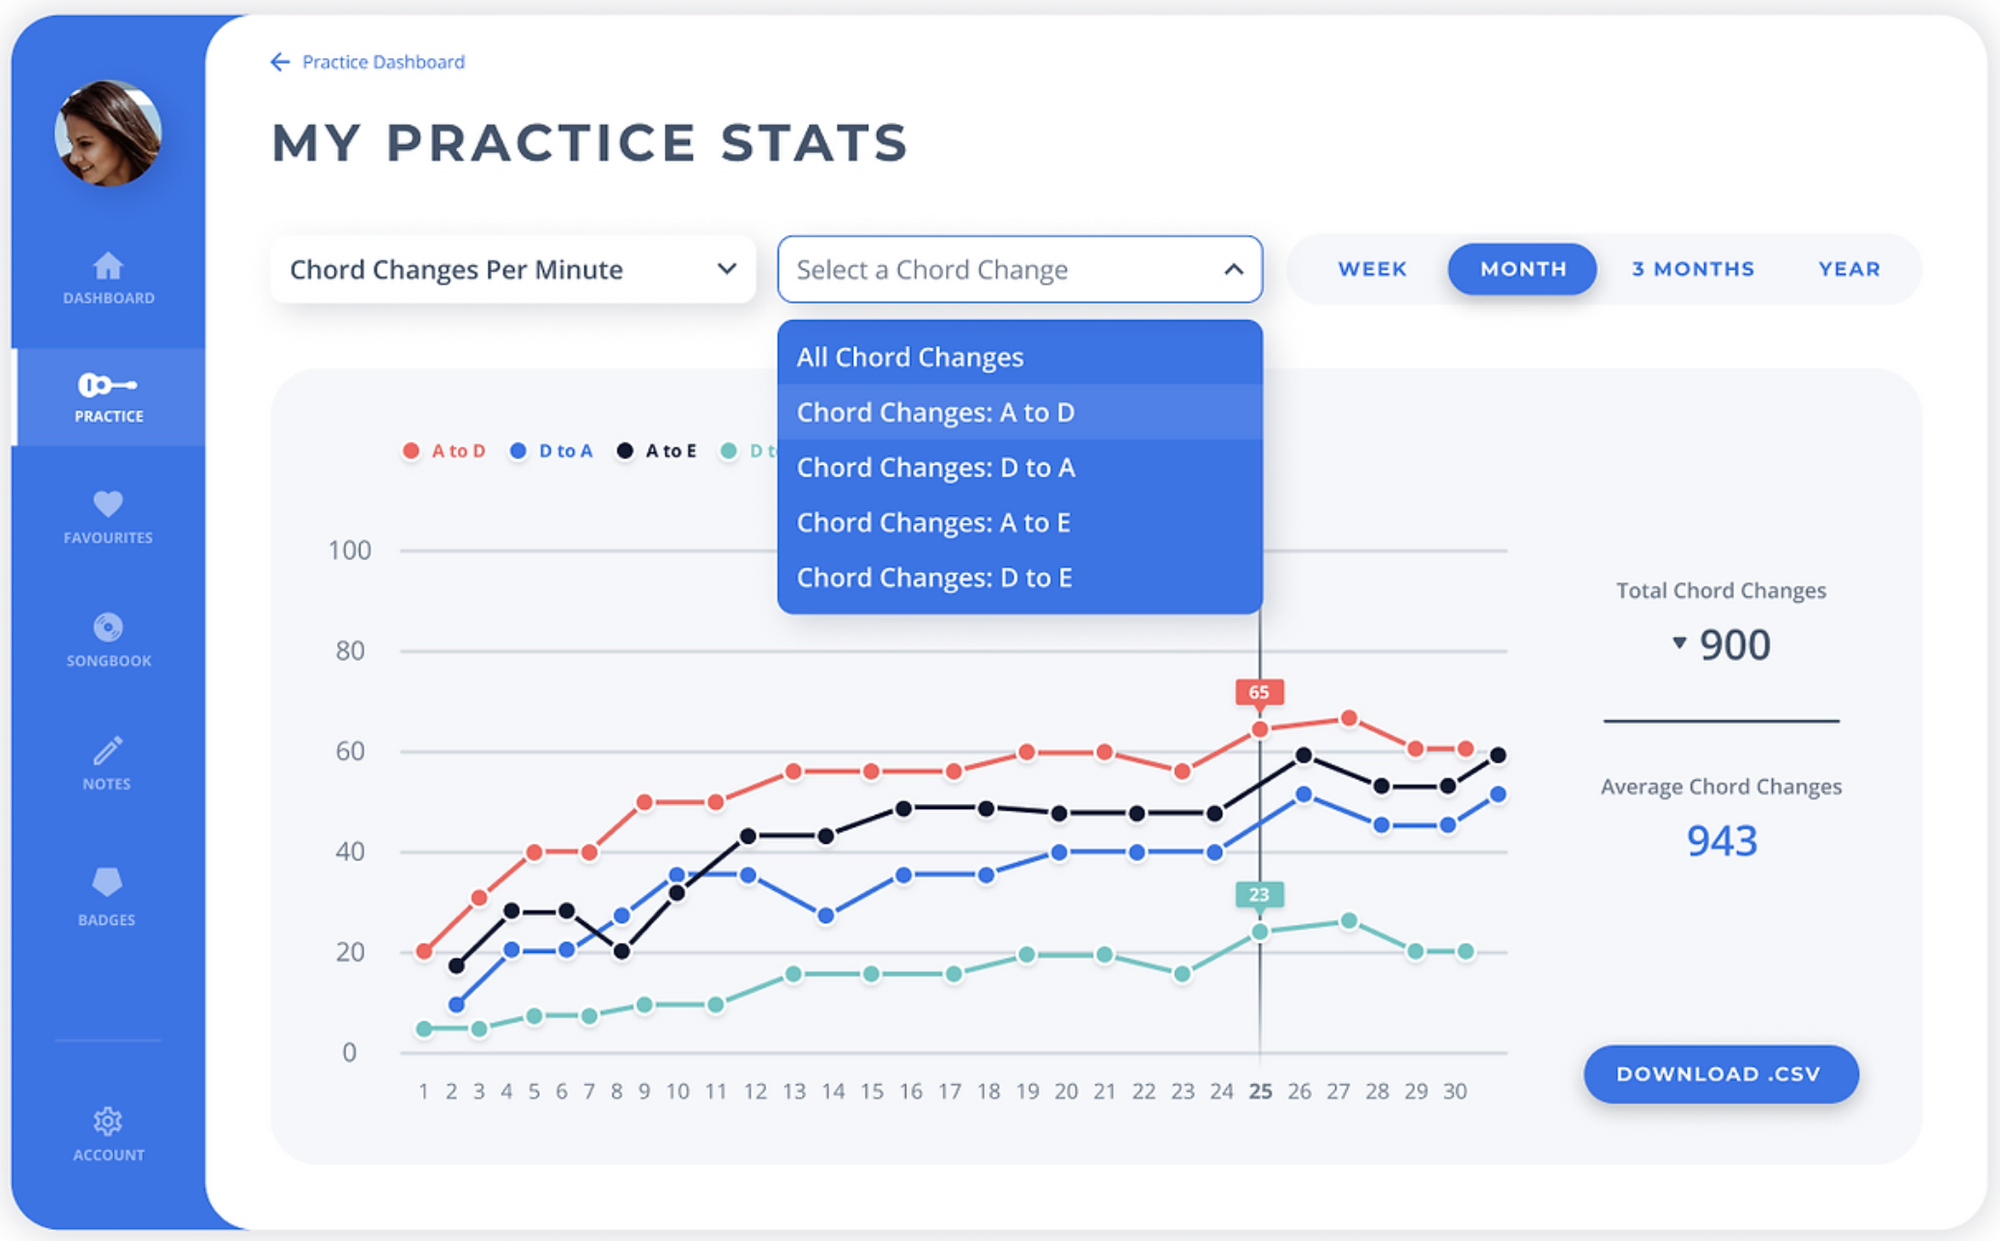 Figure 14: A high fidelity mock-up of the new Justin Guitar practice assistant tool. This page can be found in the user dashboard and is titled ‘My Practice Stats’. It allows users to record key metrics such as chord changes per minute and see their data over time in a line chart.